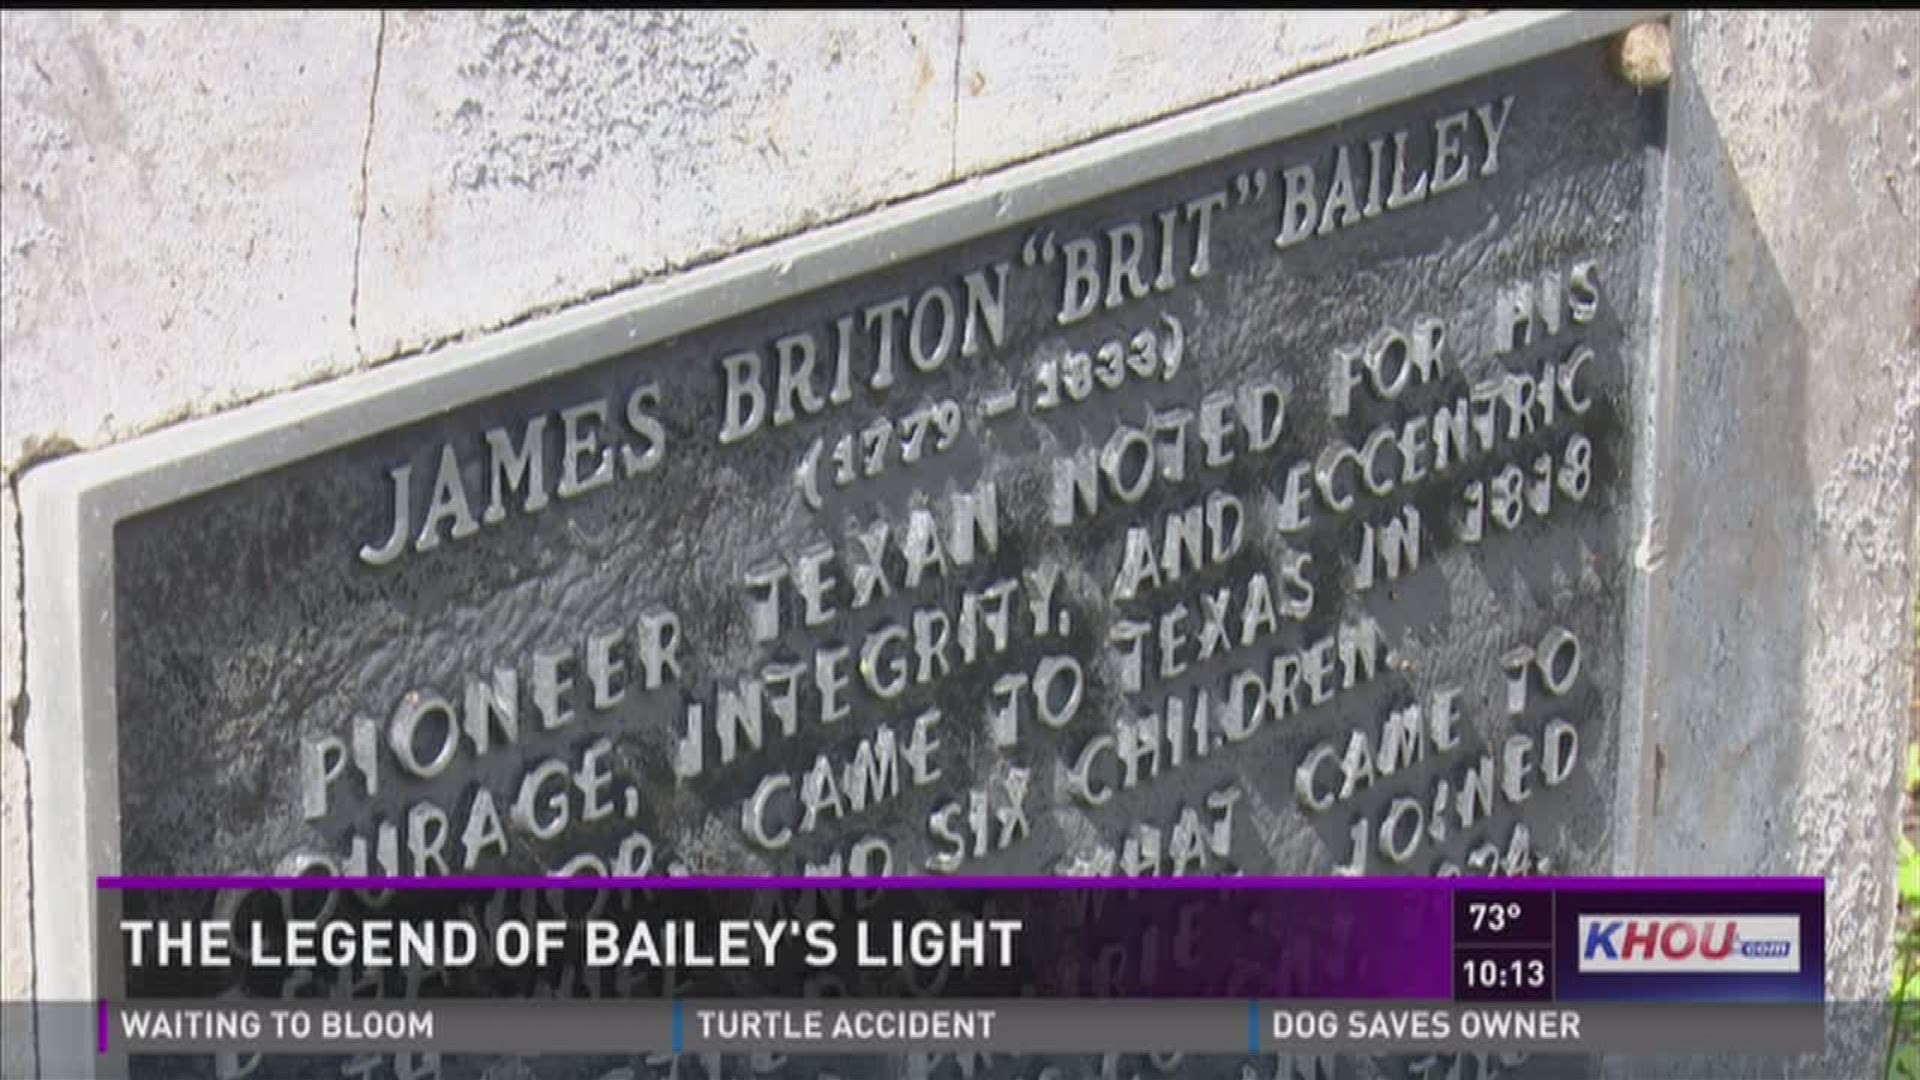 The legend of James Briton "Brit" Bailey, an early Texas pioneer, still haunts Bailey's Prairie nearly 200 years later.